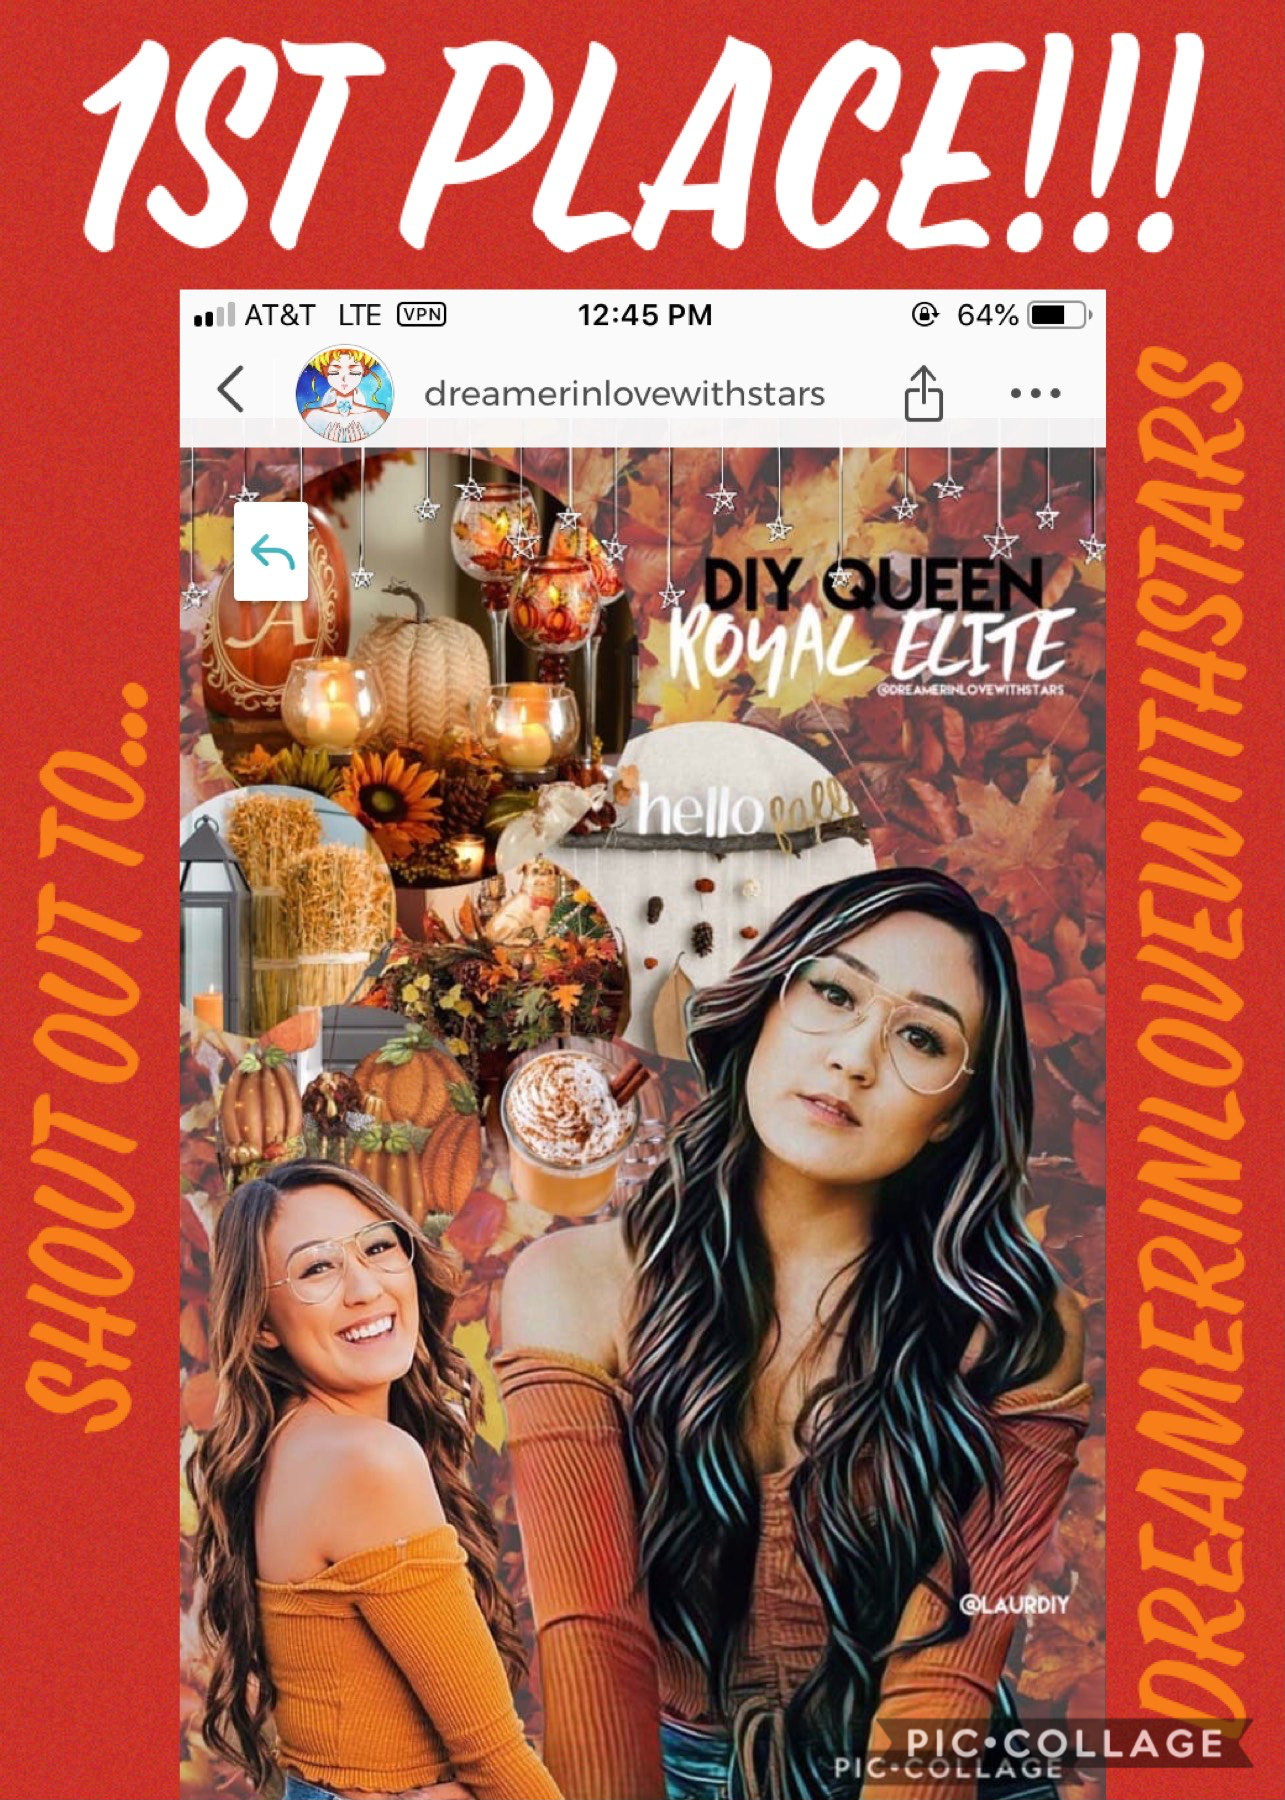 ❤️Tapppp❤️
1st place!!
🧡Dreamerinlovewithstars🧡
Go follow her her collages are 
super cute!!